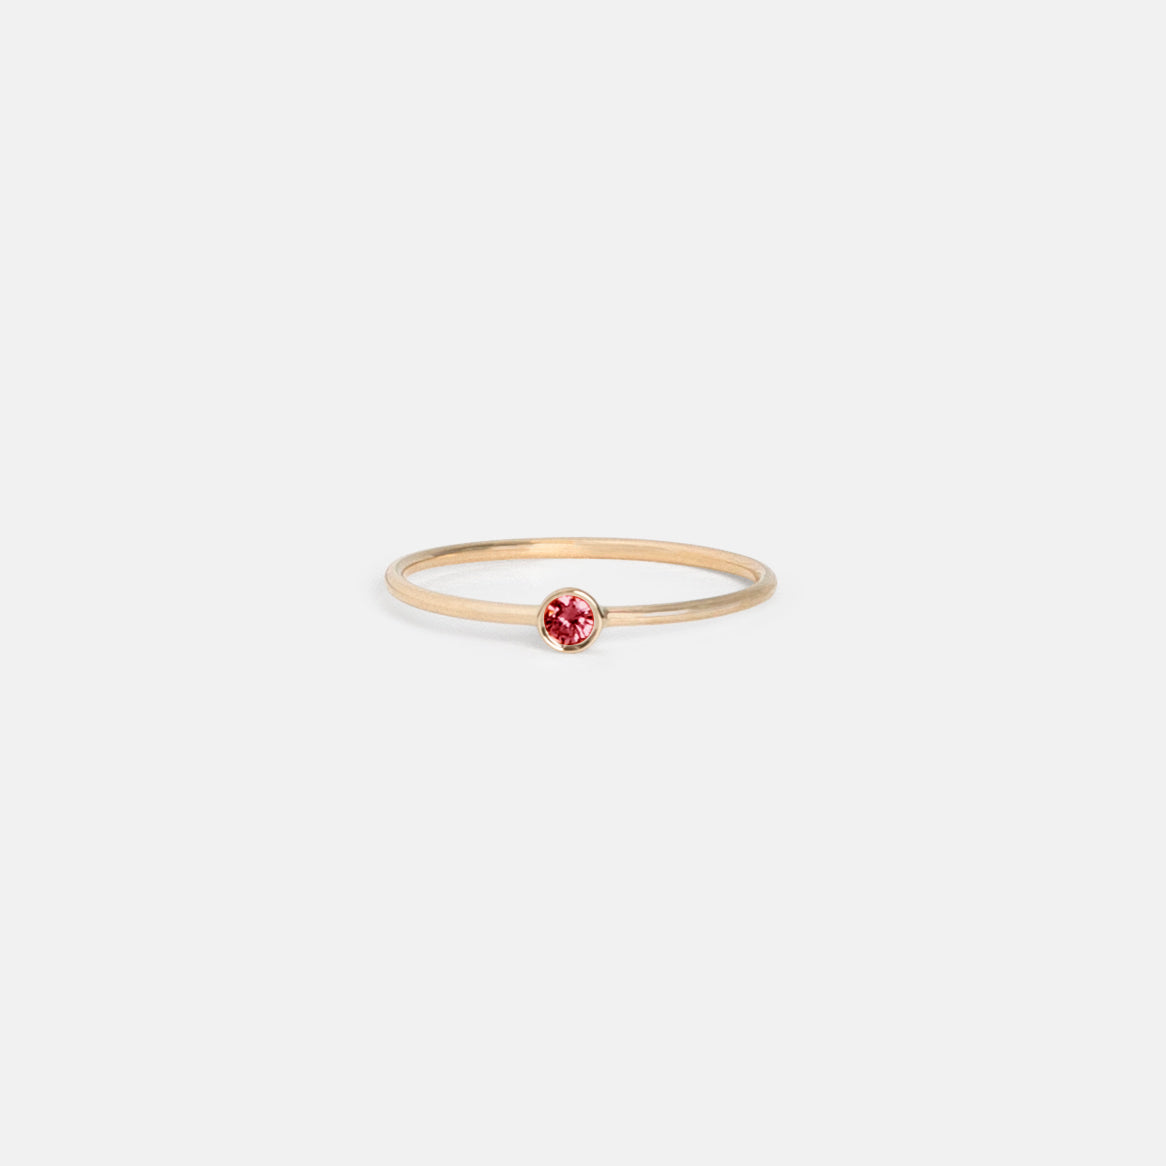 Large Kaya Ring in 14k Gold set with Ruby by SHW Fine Jewelry